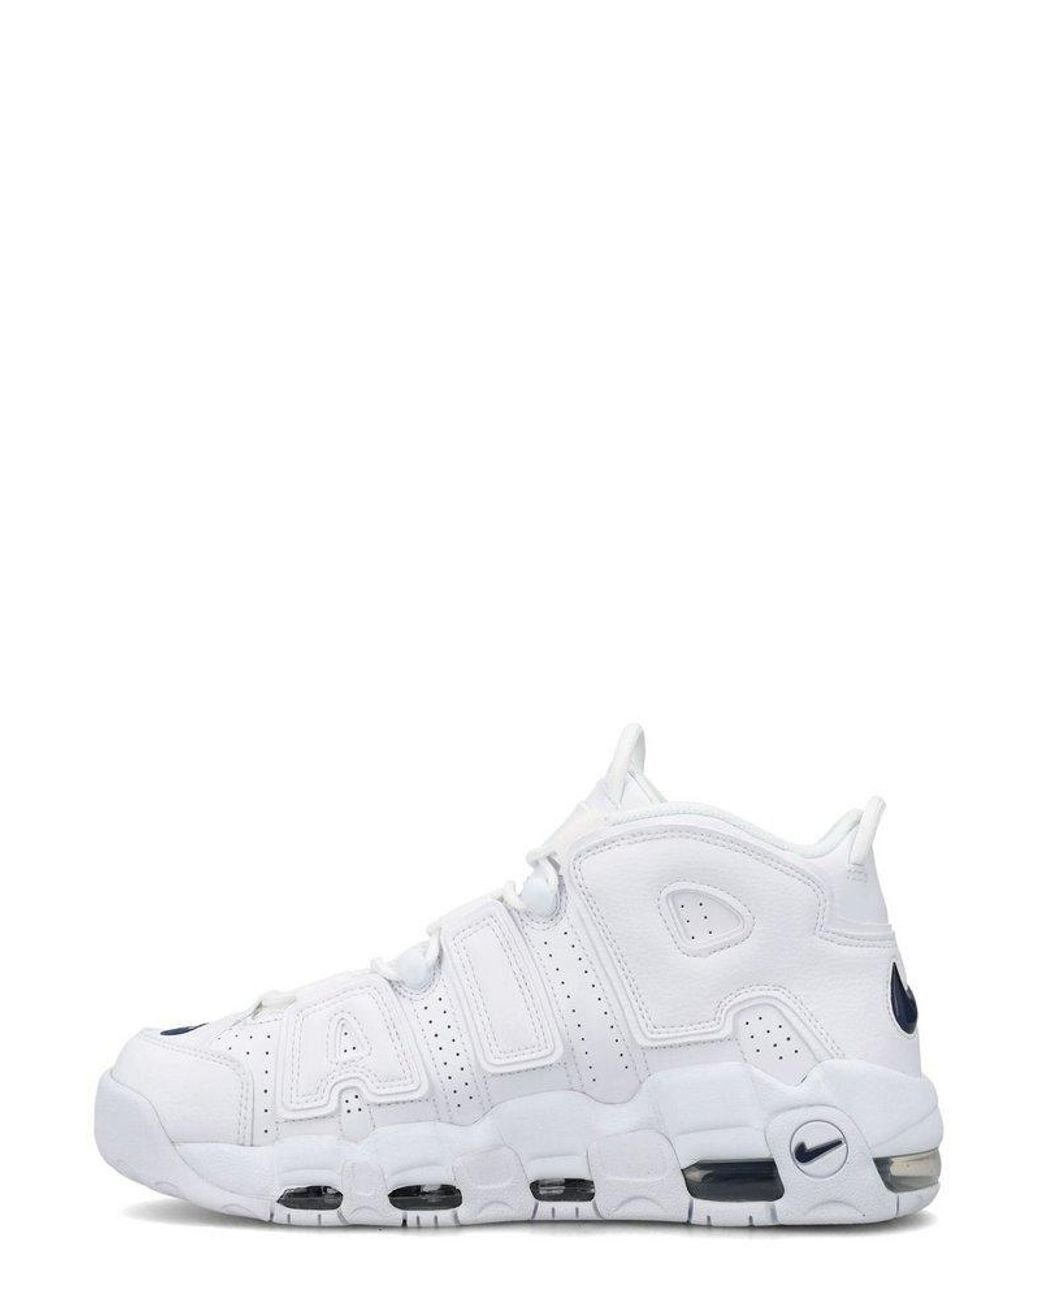 Nike Rubber Air More Uptempo 96 in White Navy (White) - Save 10% | Lyst UK